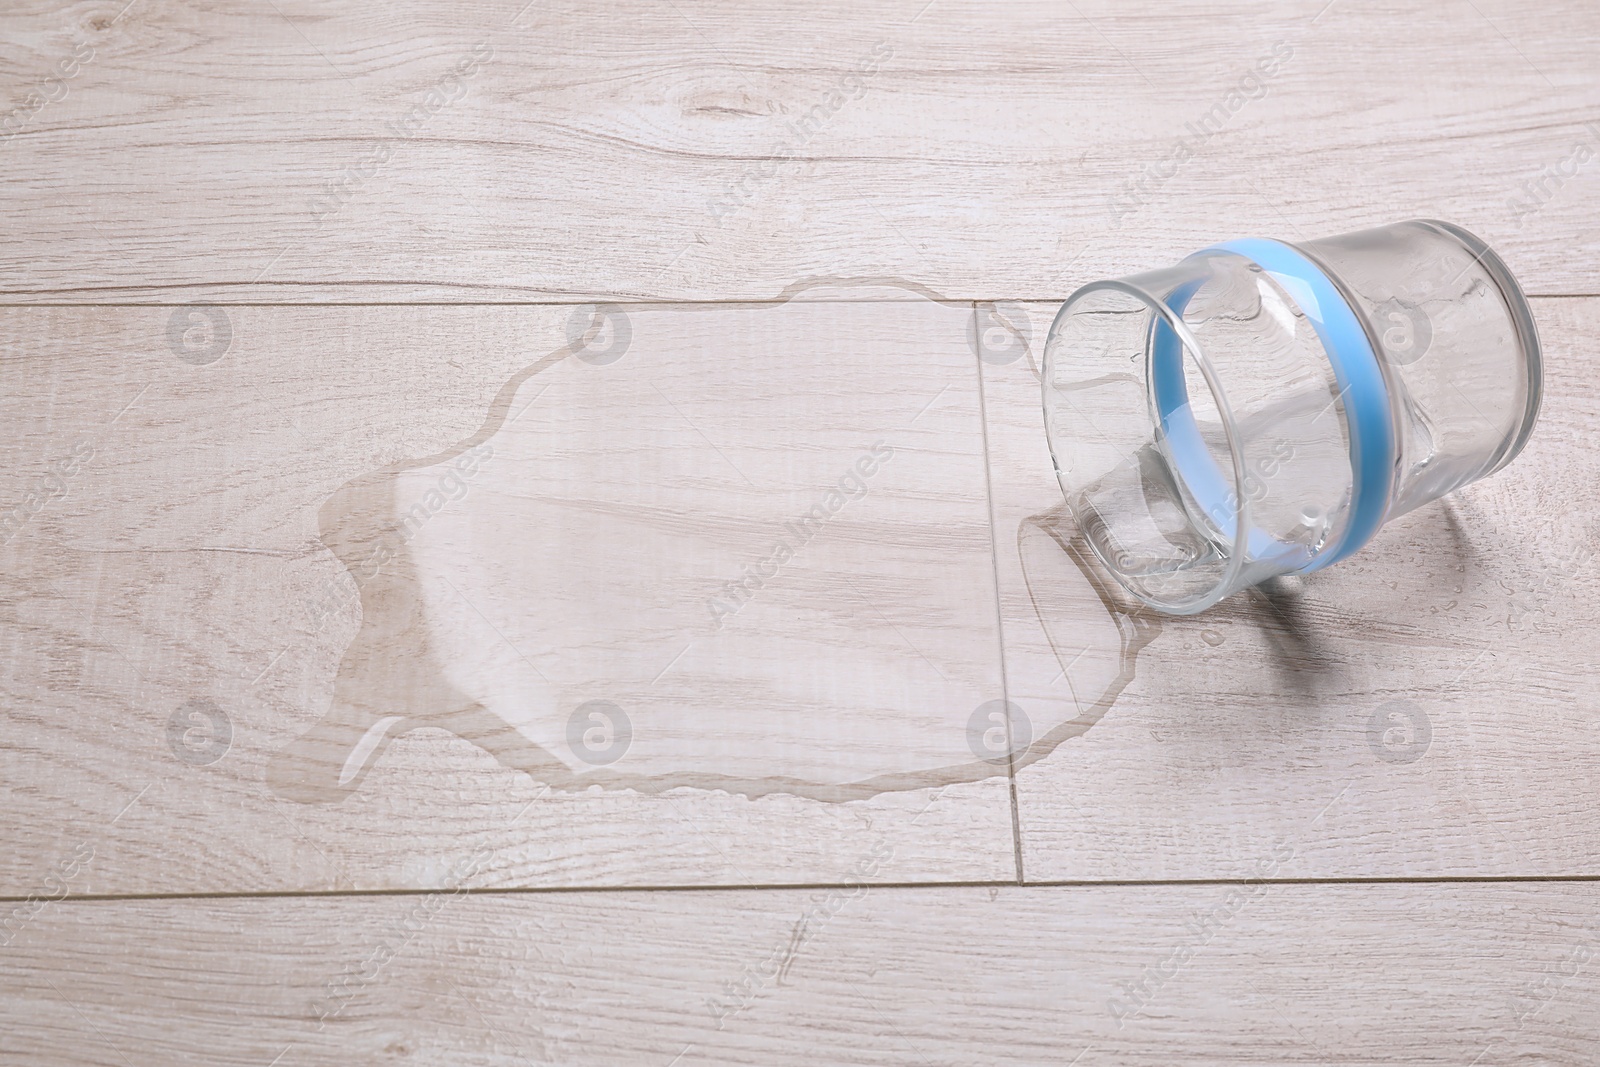 Photo of Glass with spilled water on wooden floor